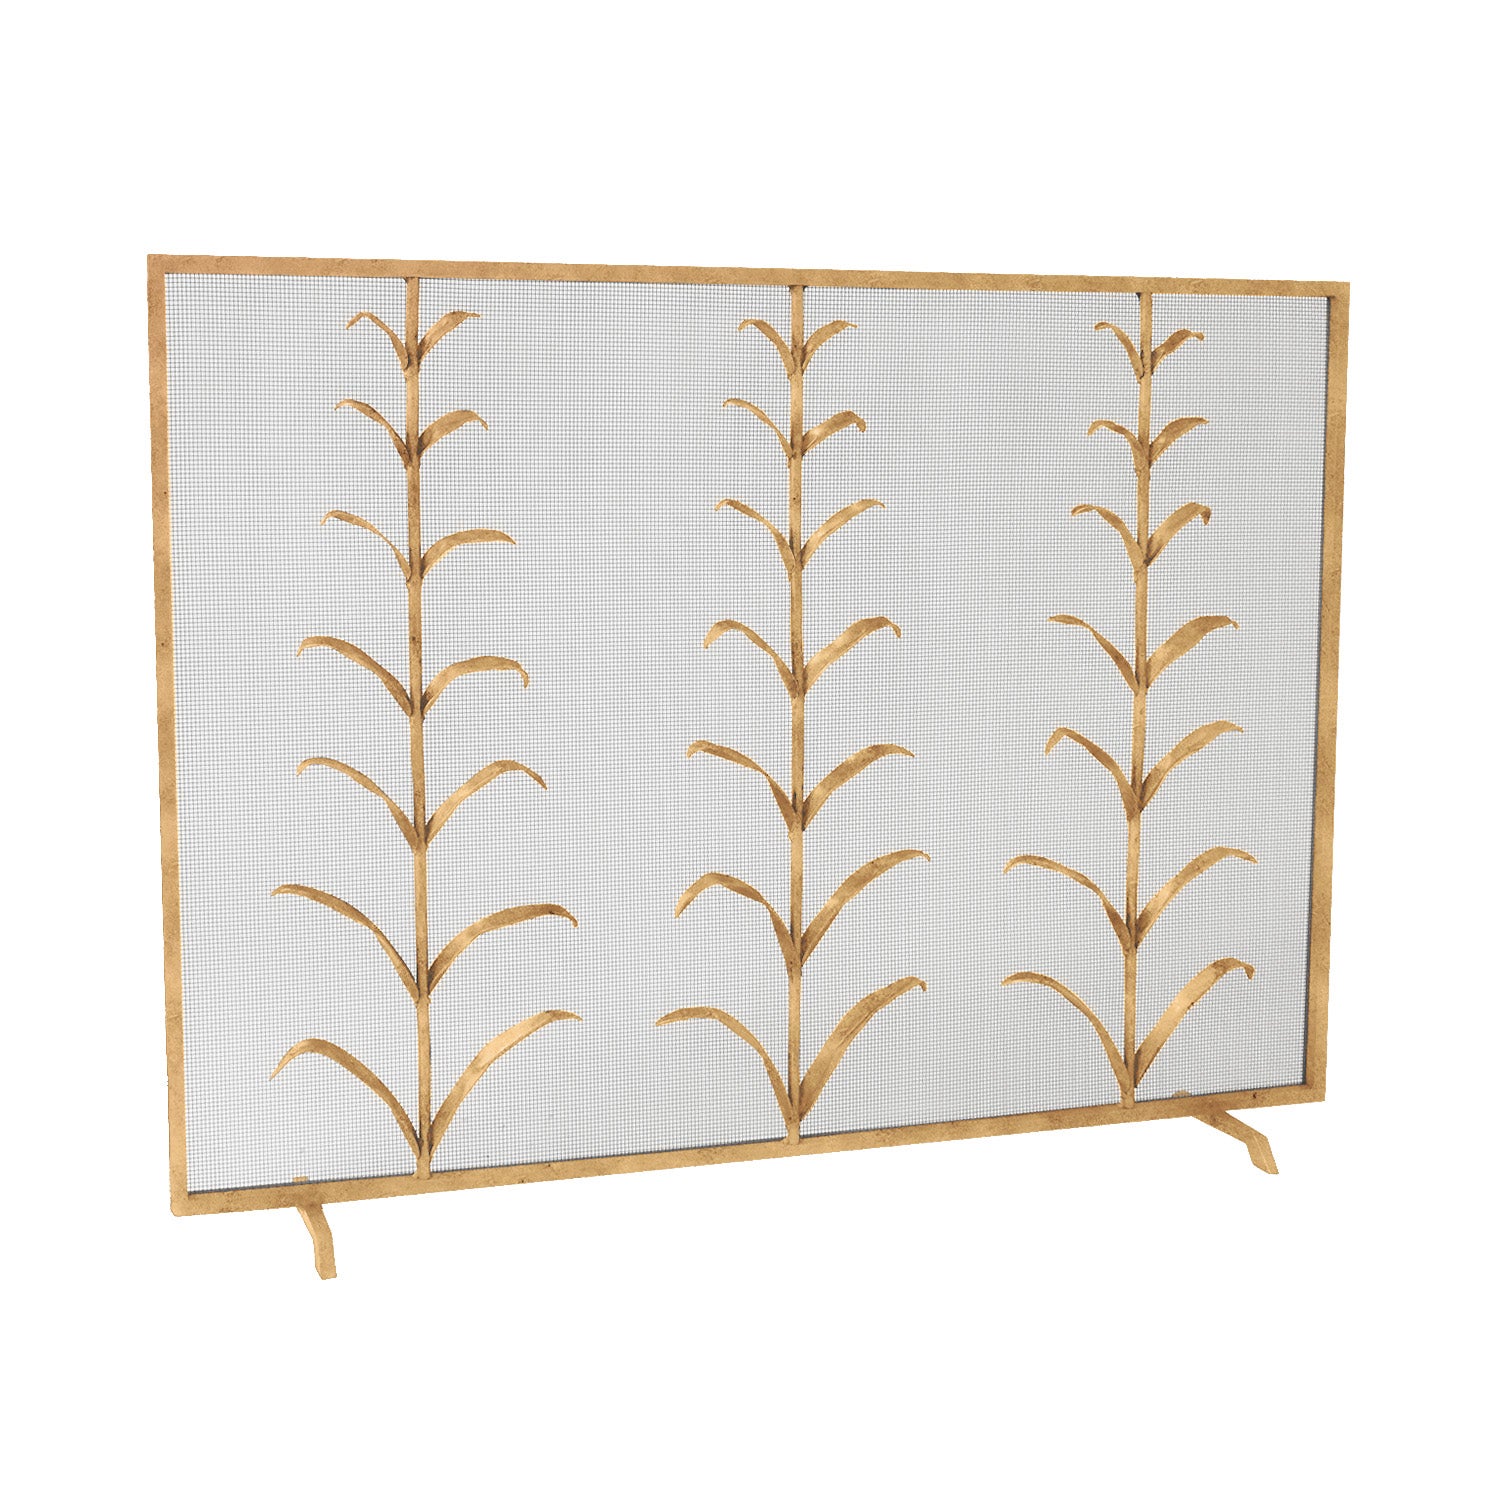 Lily Stems Fireplace Screen in Brilliant Gold For Sale